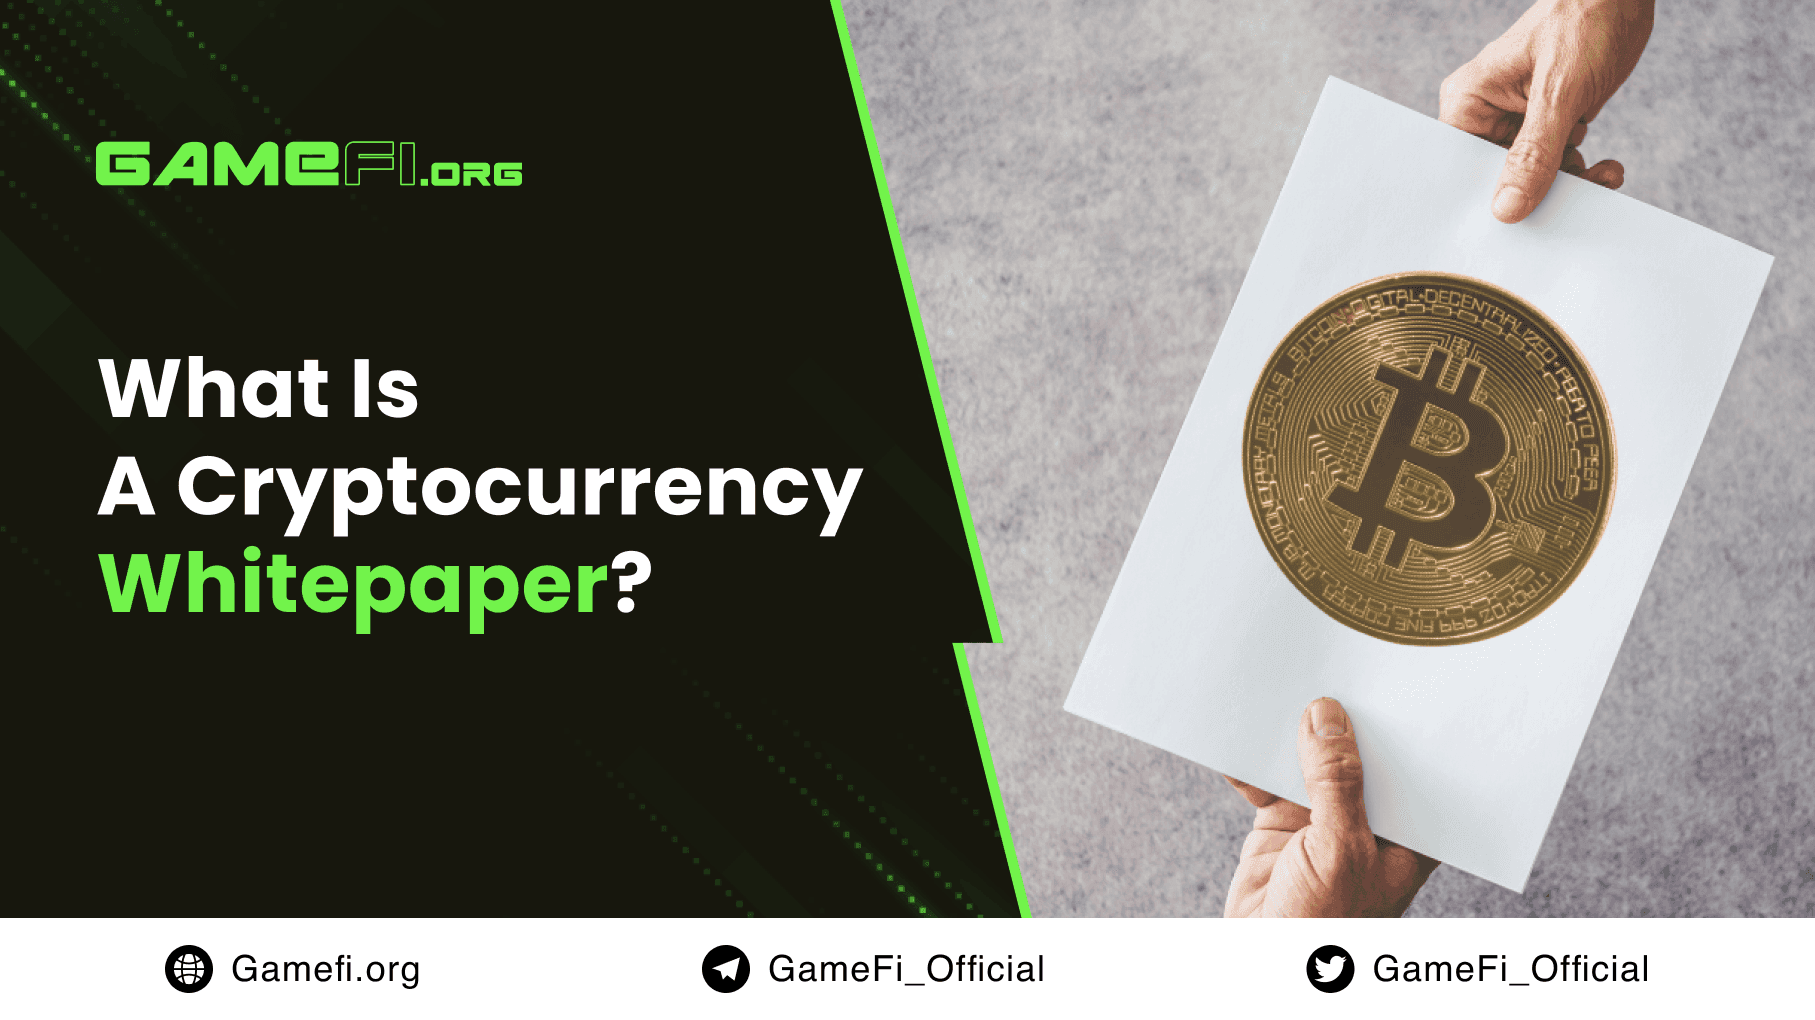 What Is A Cryptocurrency Whitepaper?